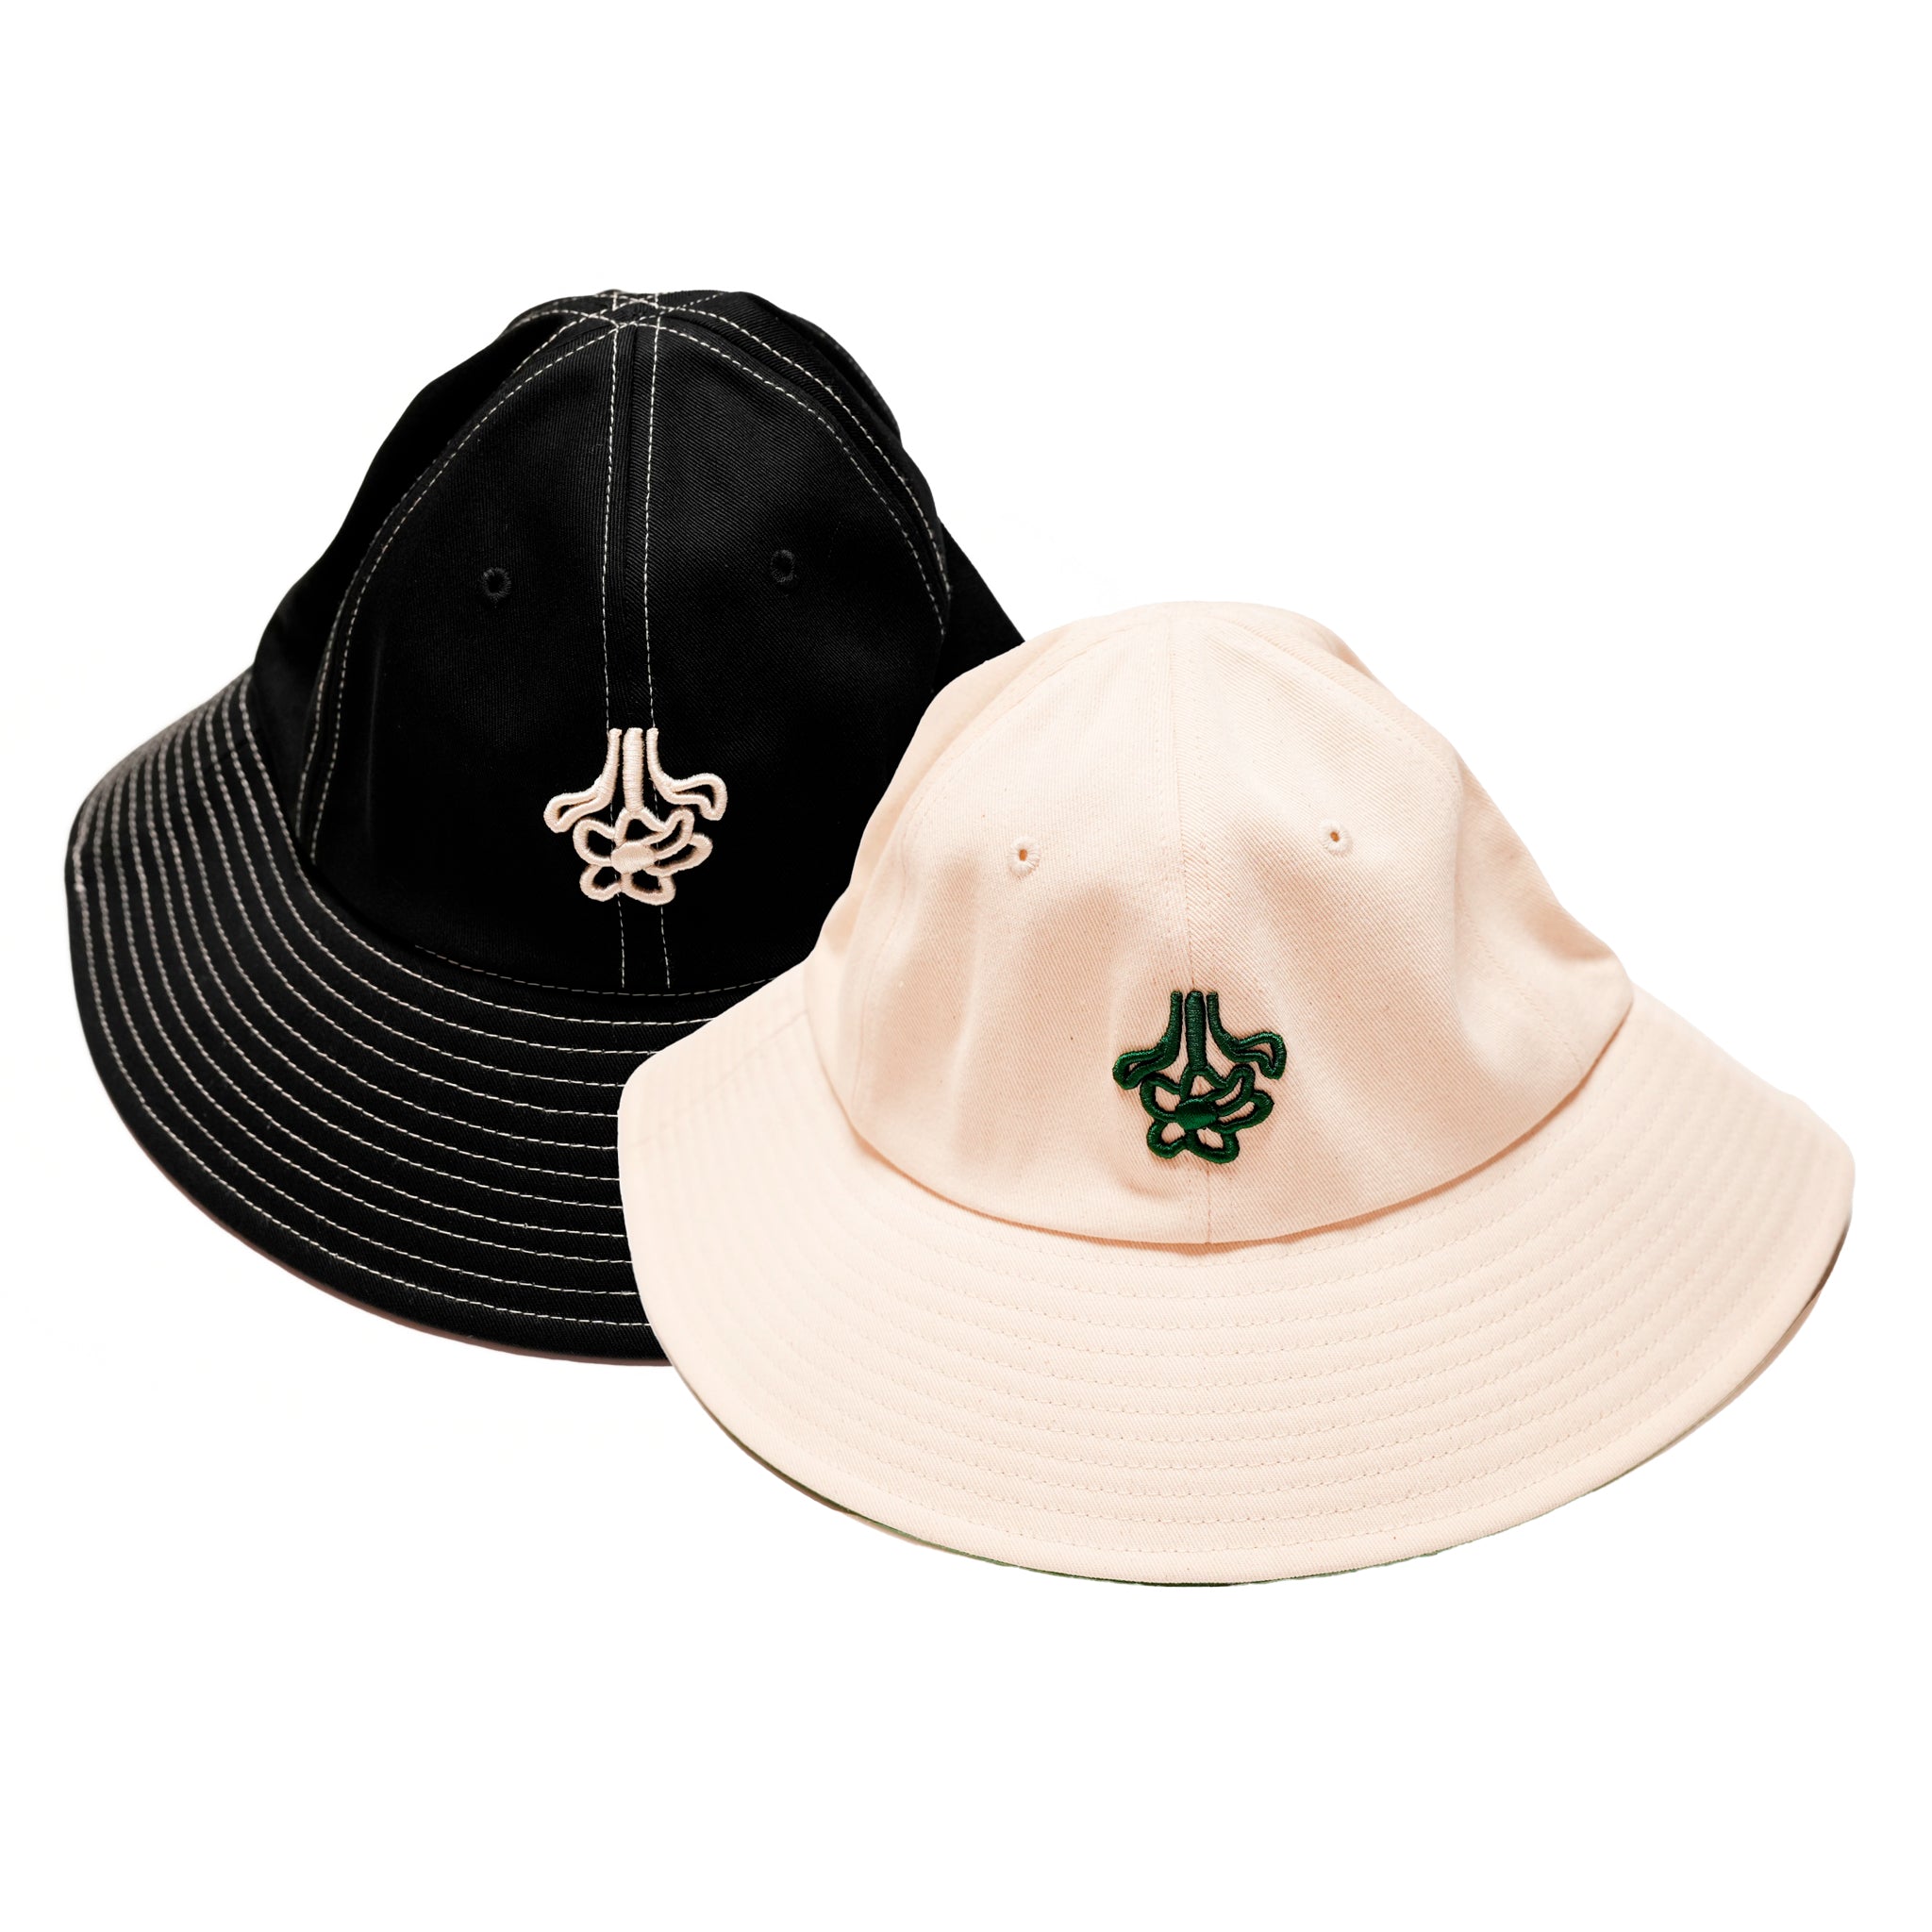 Name:Embroidered Logo Hat 刺繍ロゴハット | Color:Black/Natural | Size:Free【AMBERGLEAM_アンバーグリーム】| No:1194141322